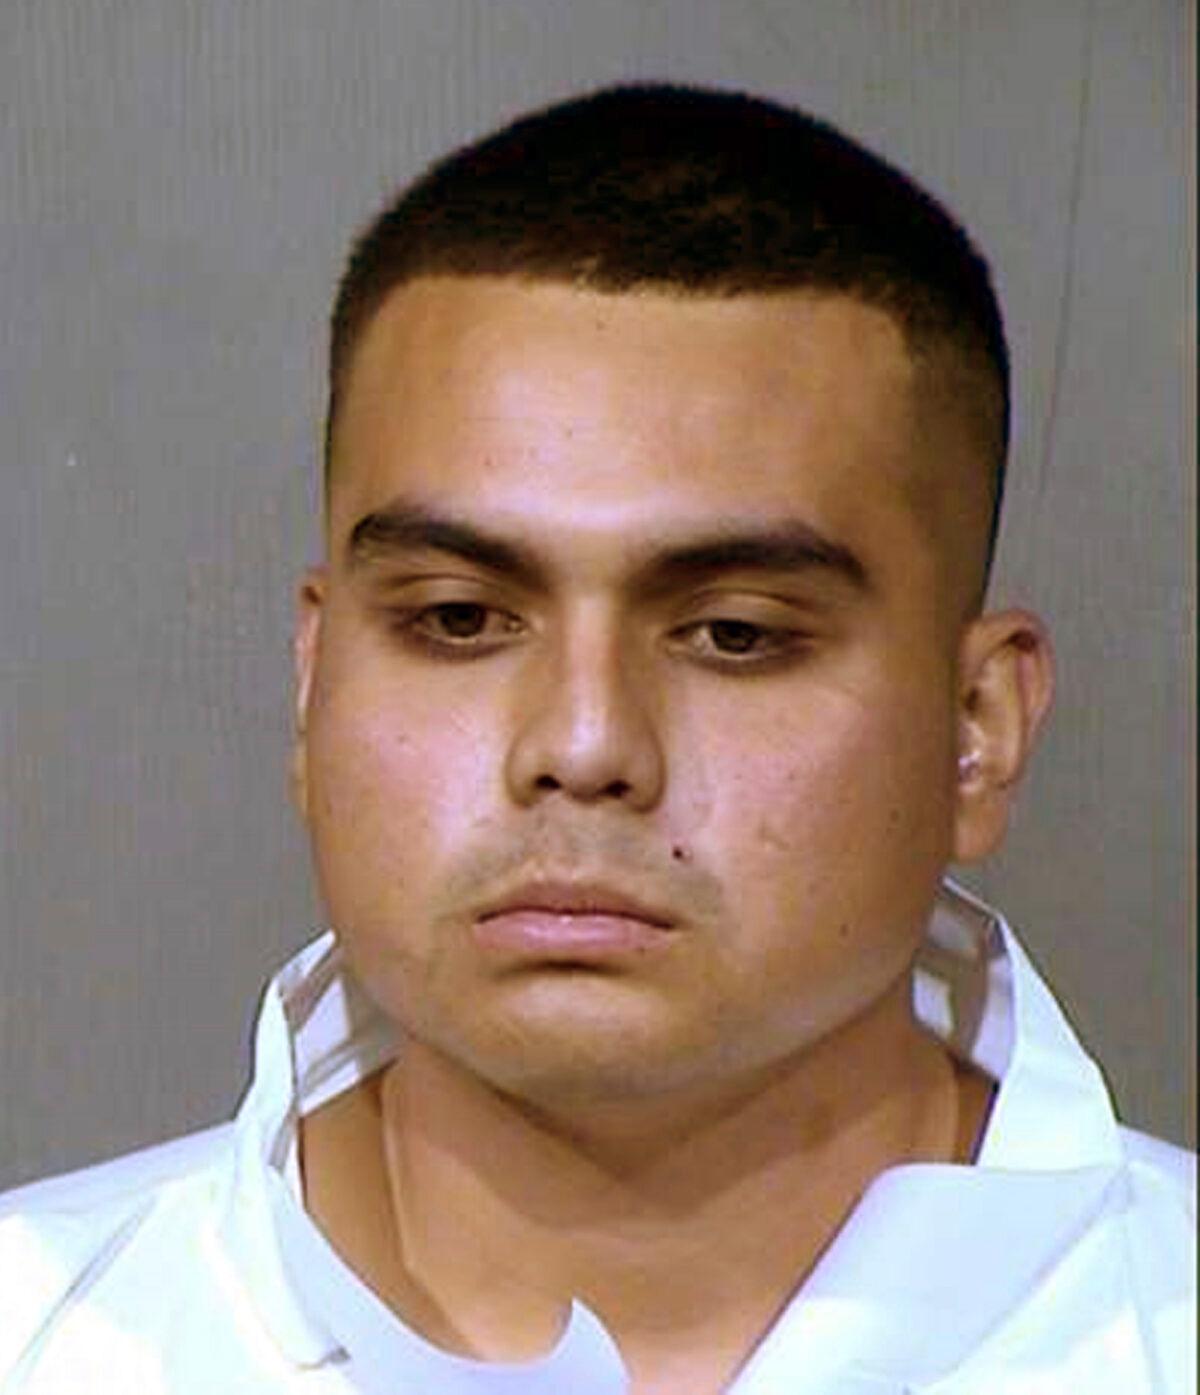 This booking photo provided by the Maricopa County Sheriff's Office shows 20-year-old Armando Hernandez Jr., who was arrested on suspicion of aggravated assault and other crimes in a shooting near a shopping and entertainment district in Glendale, Ariz, on May 20, 2020. (Maricopa County Sheriff's Office via AP)